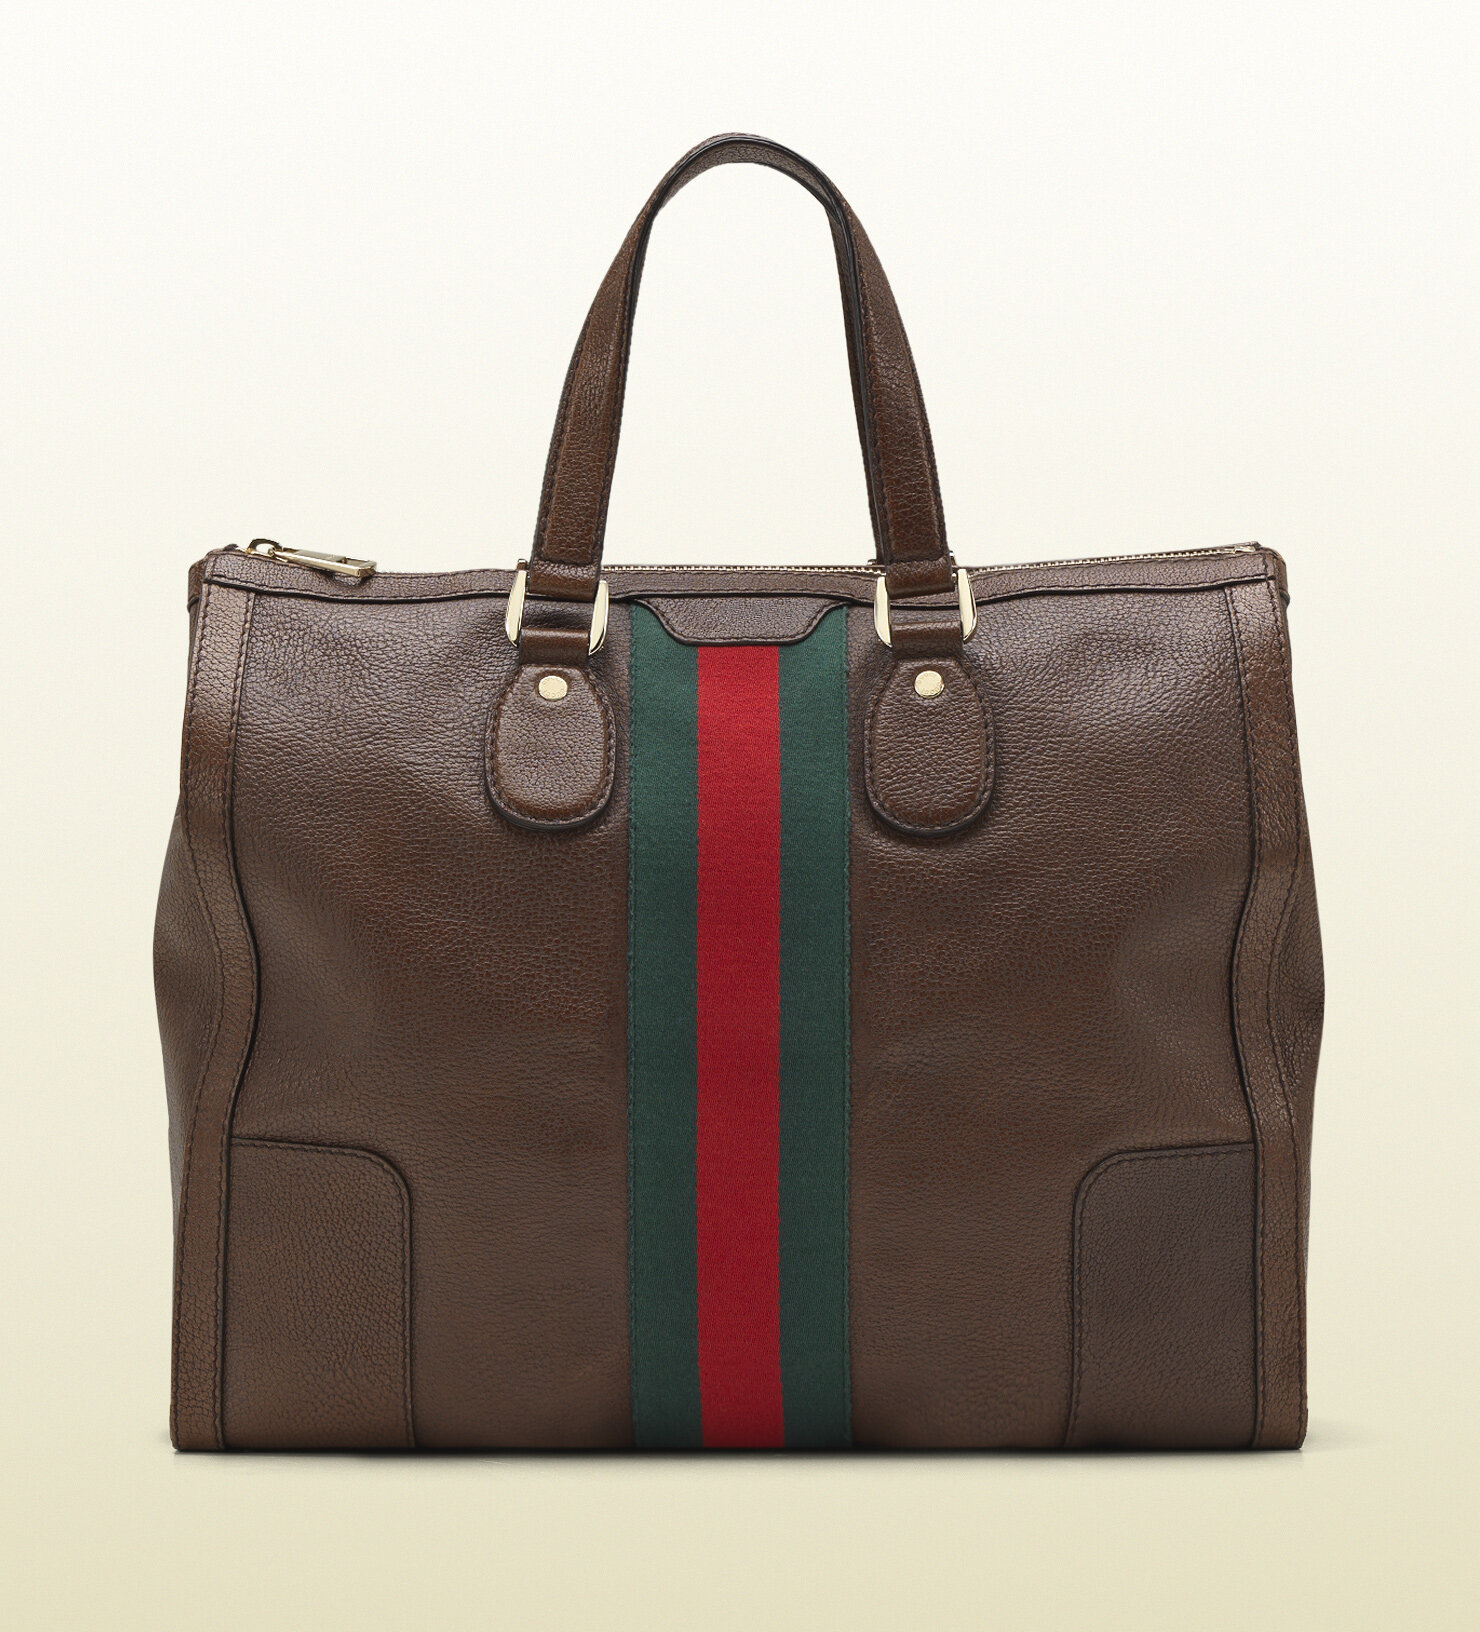 Gucci Seventies Signature Web Tote in Brown Leather.jpg